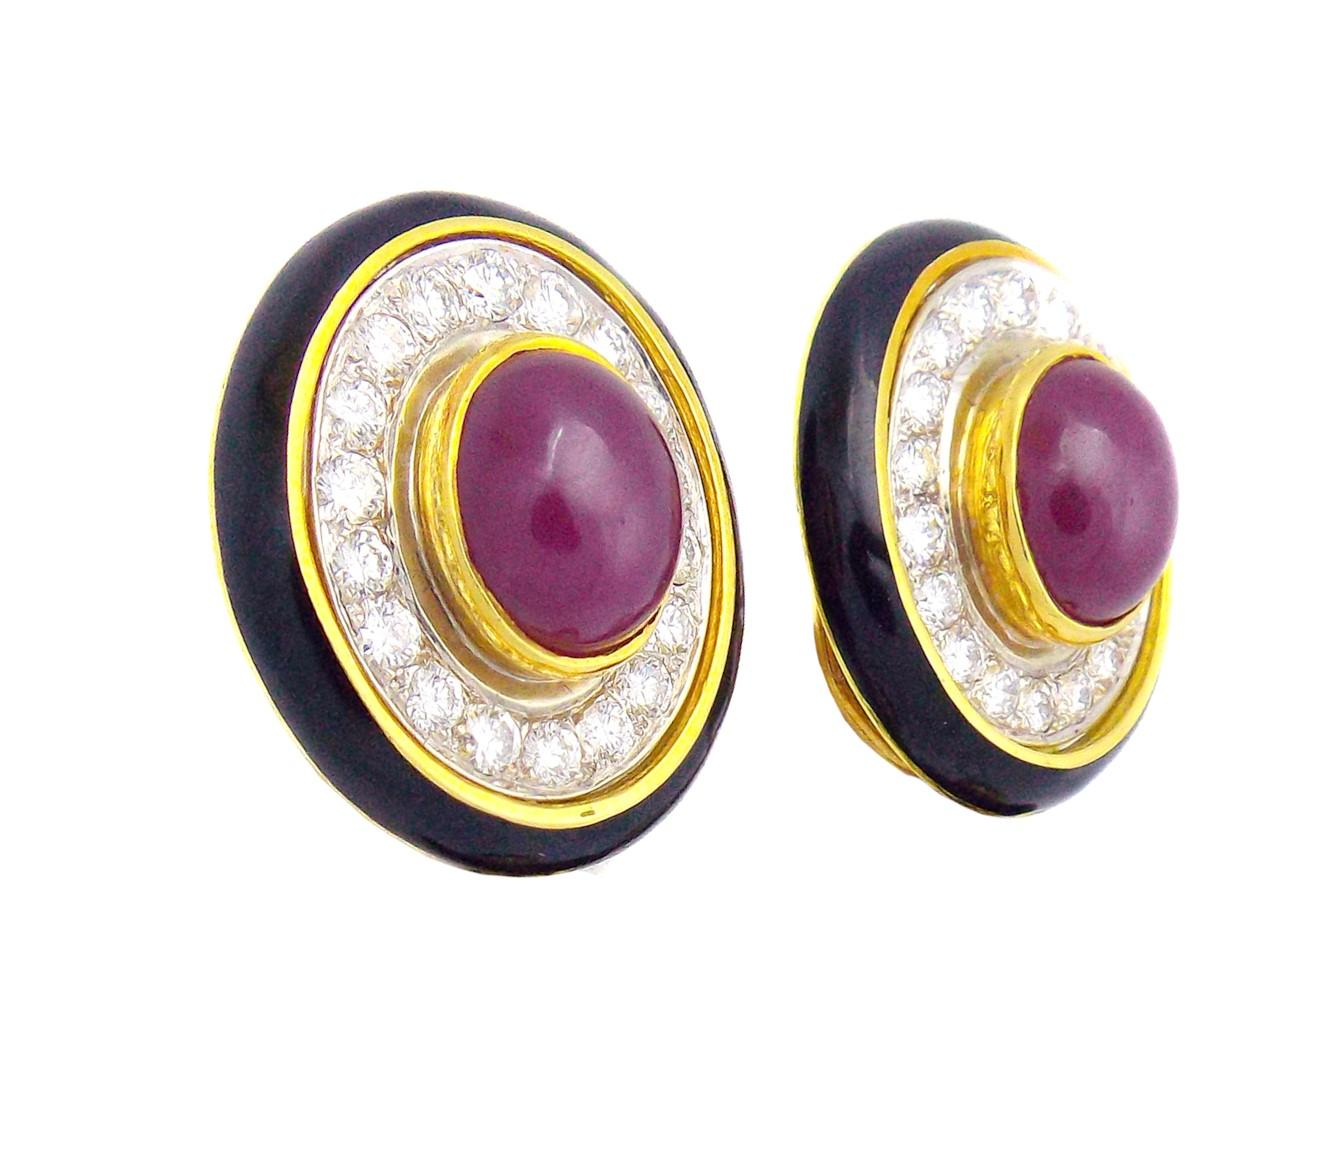 A pair of gold, ruby, diamond and enamel earclips, 
in an oval design with outer black enamel borders, the centers containing 36 round brilliant cut diamonds weighing approximately 1.70 carats total and two oval cabochon cut rubies measuring